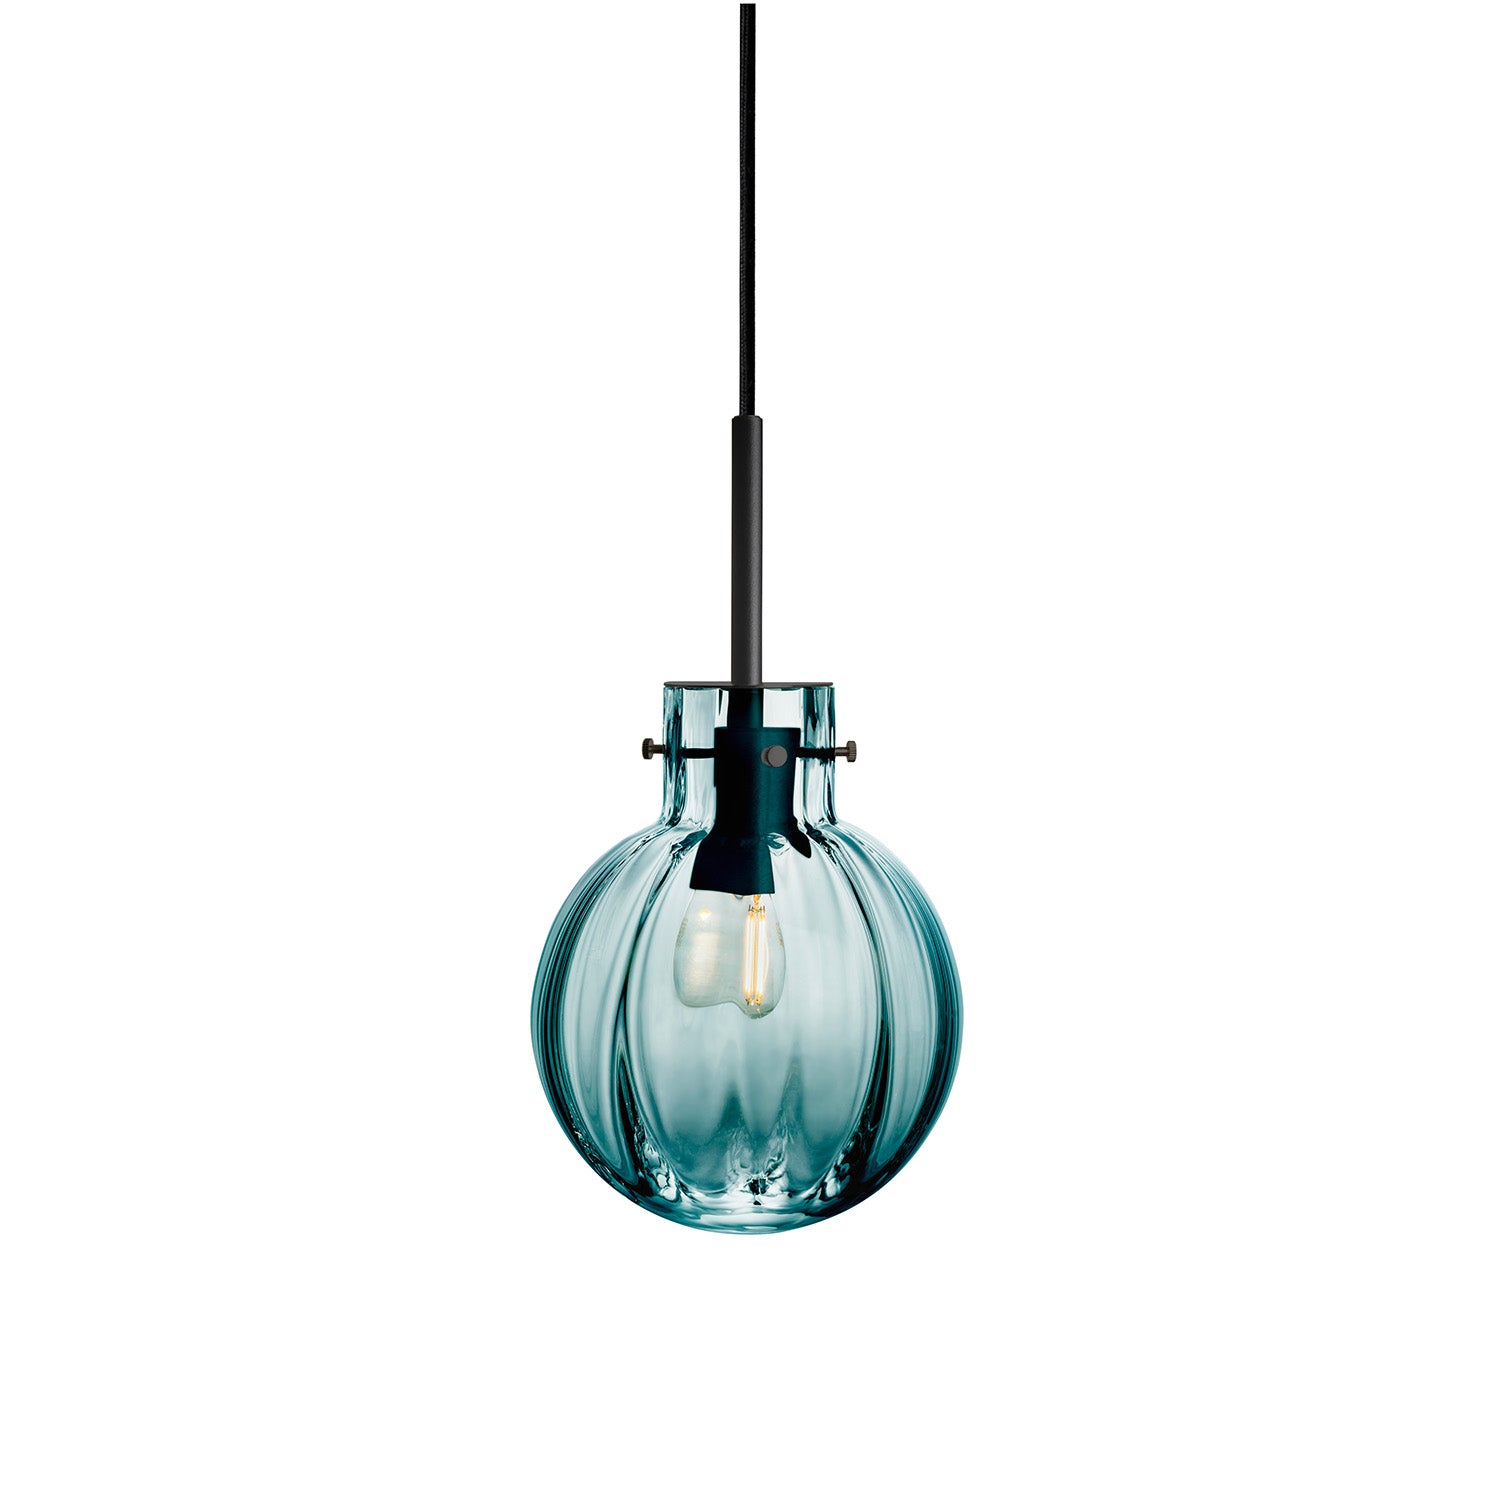 OPTIC - Blown glass pendant lamp, entirely handcrafted